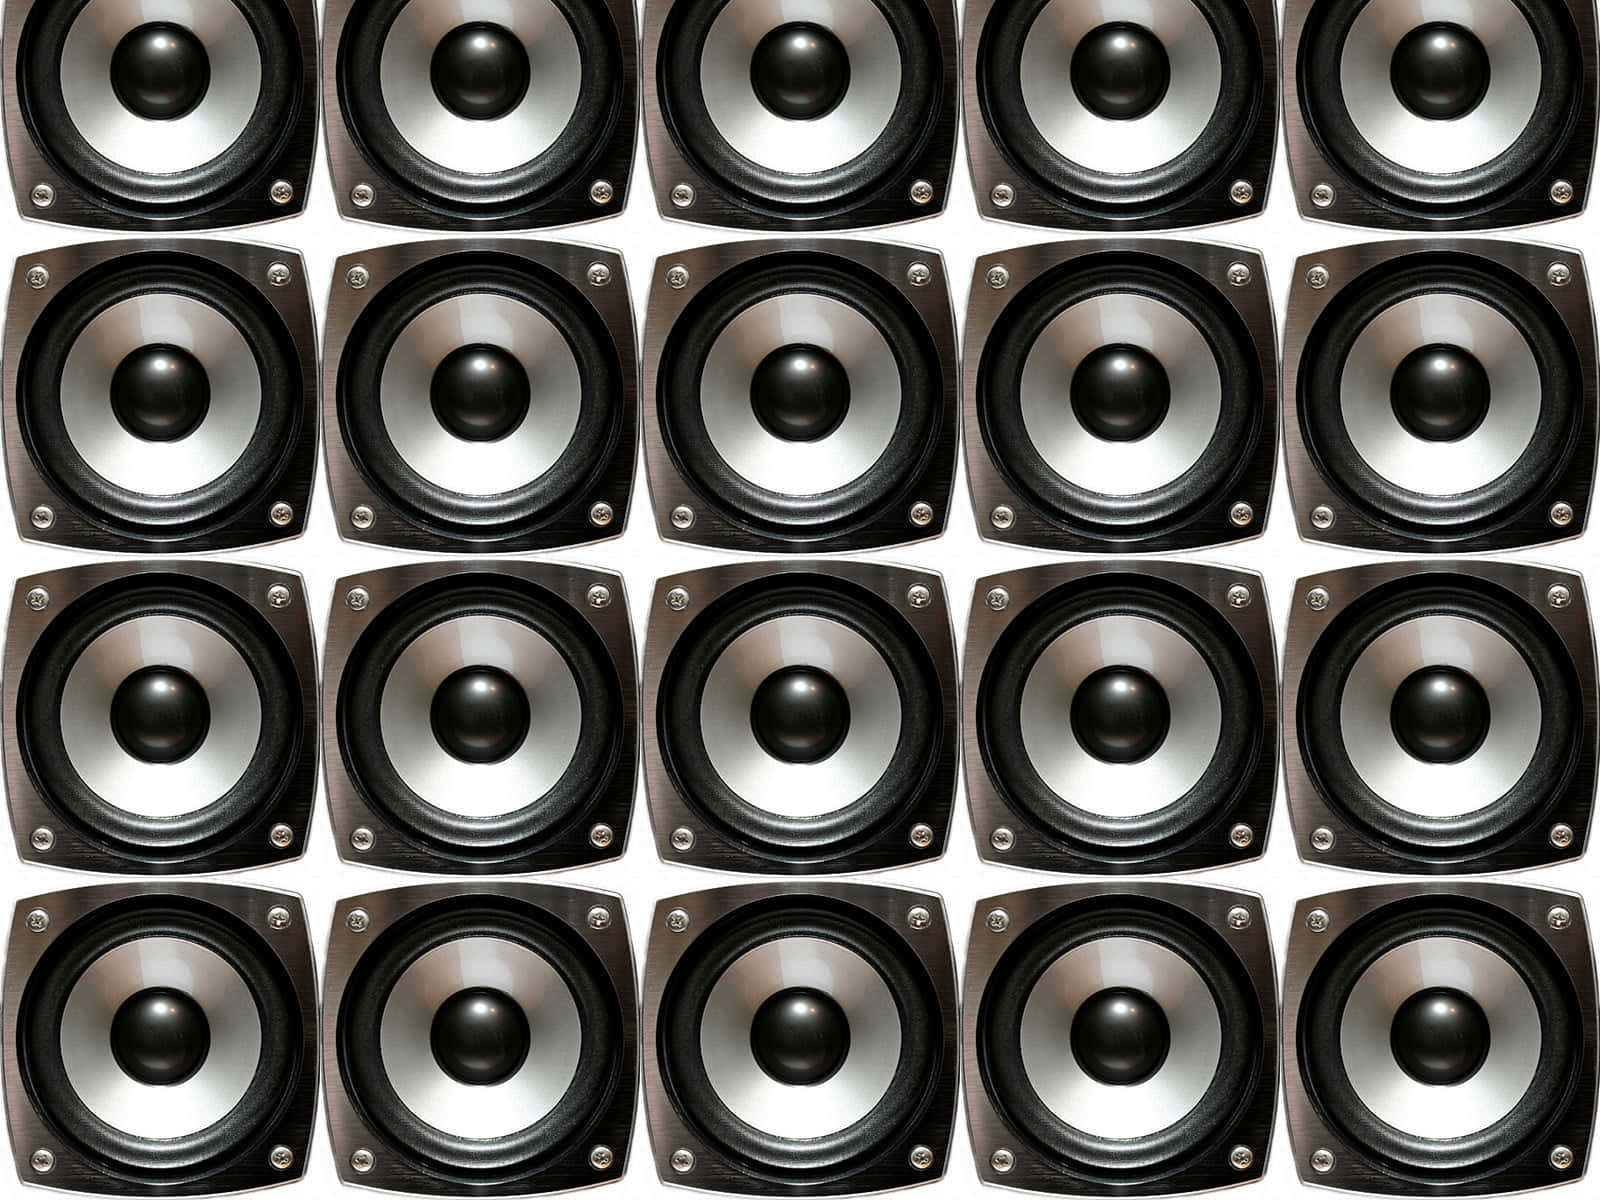 Multiple Wall Metal Sound Speakers Illustration Picture